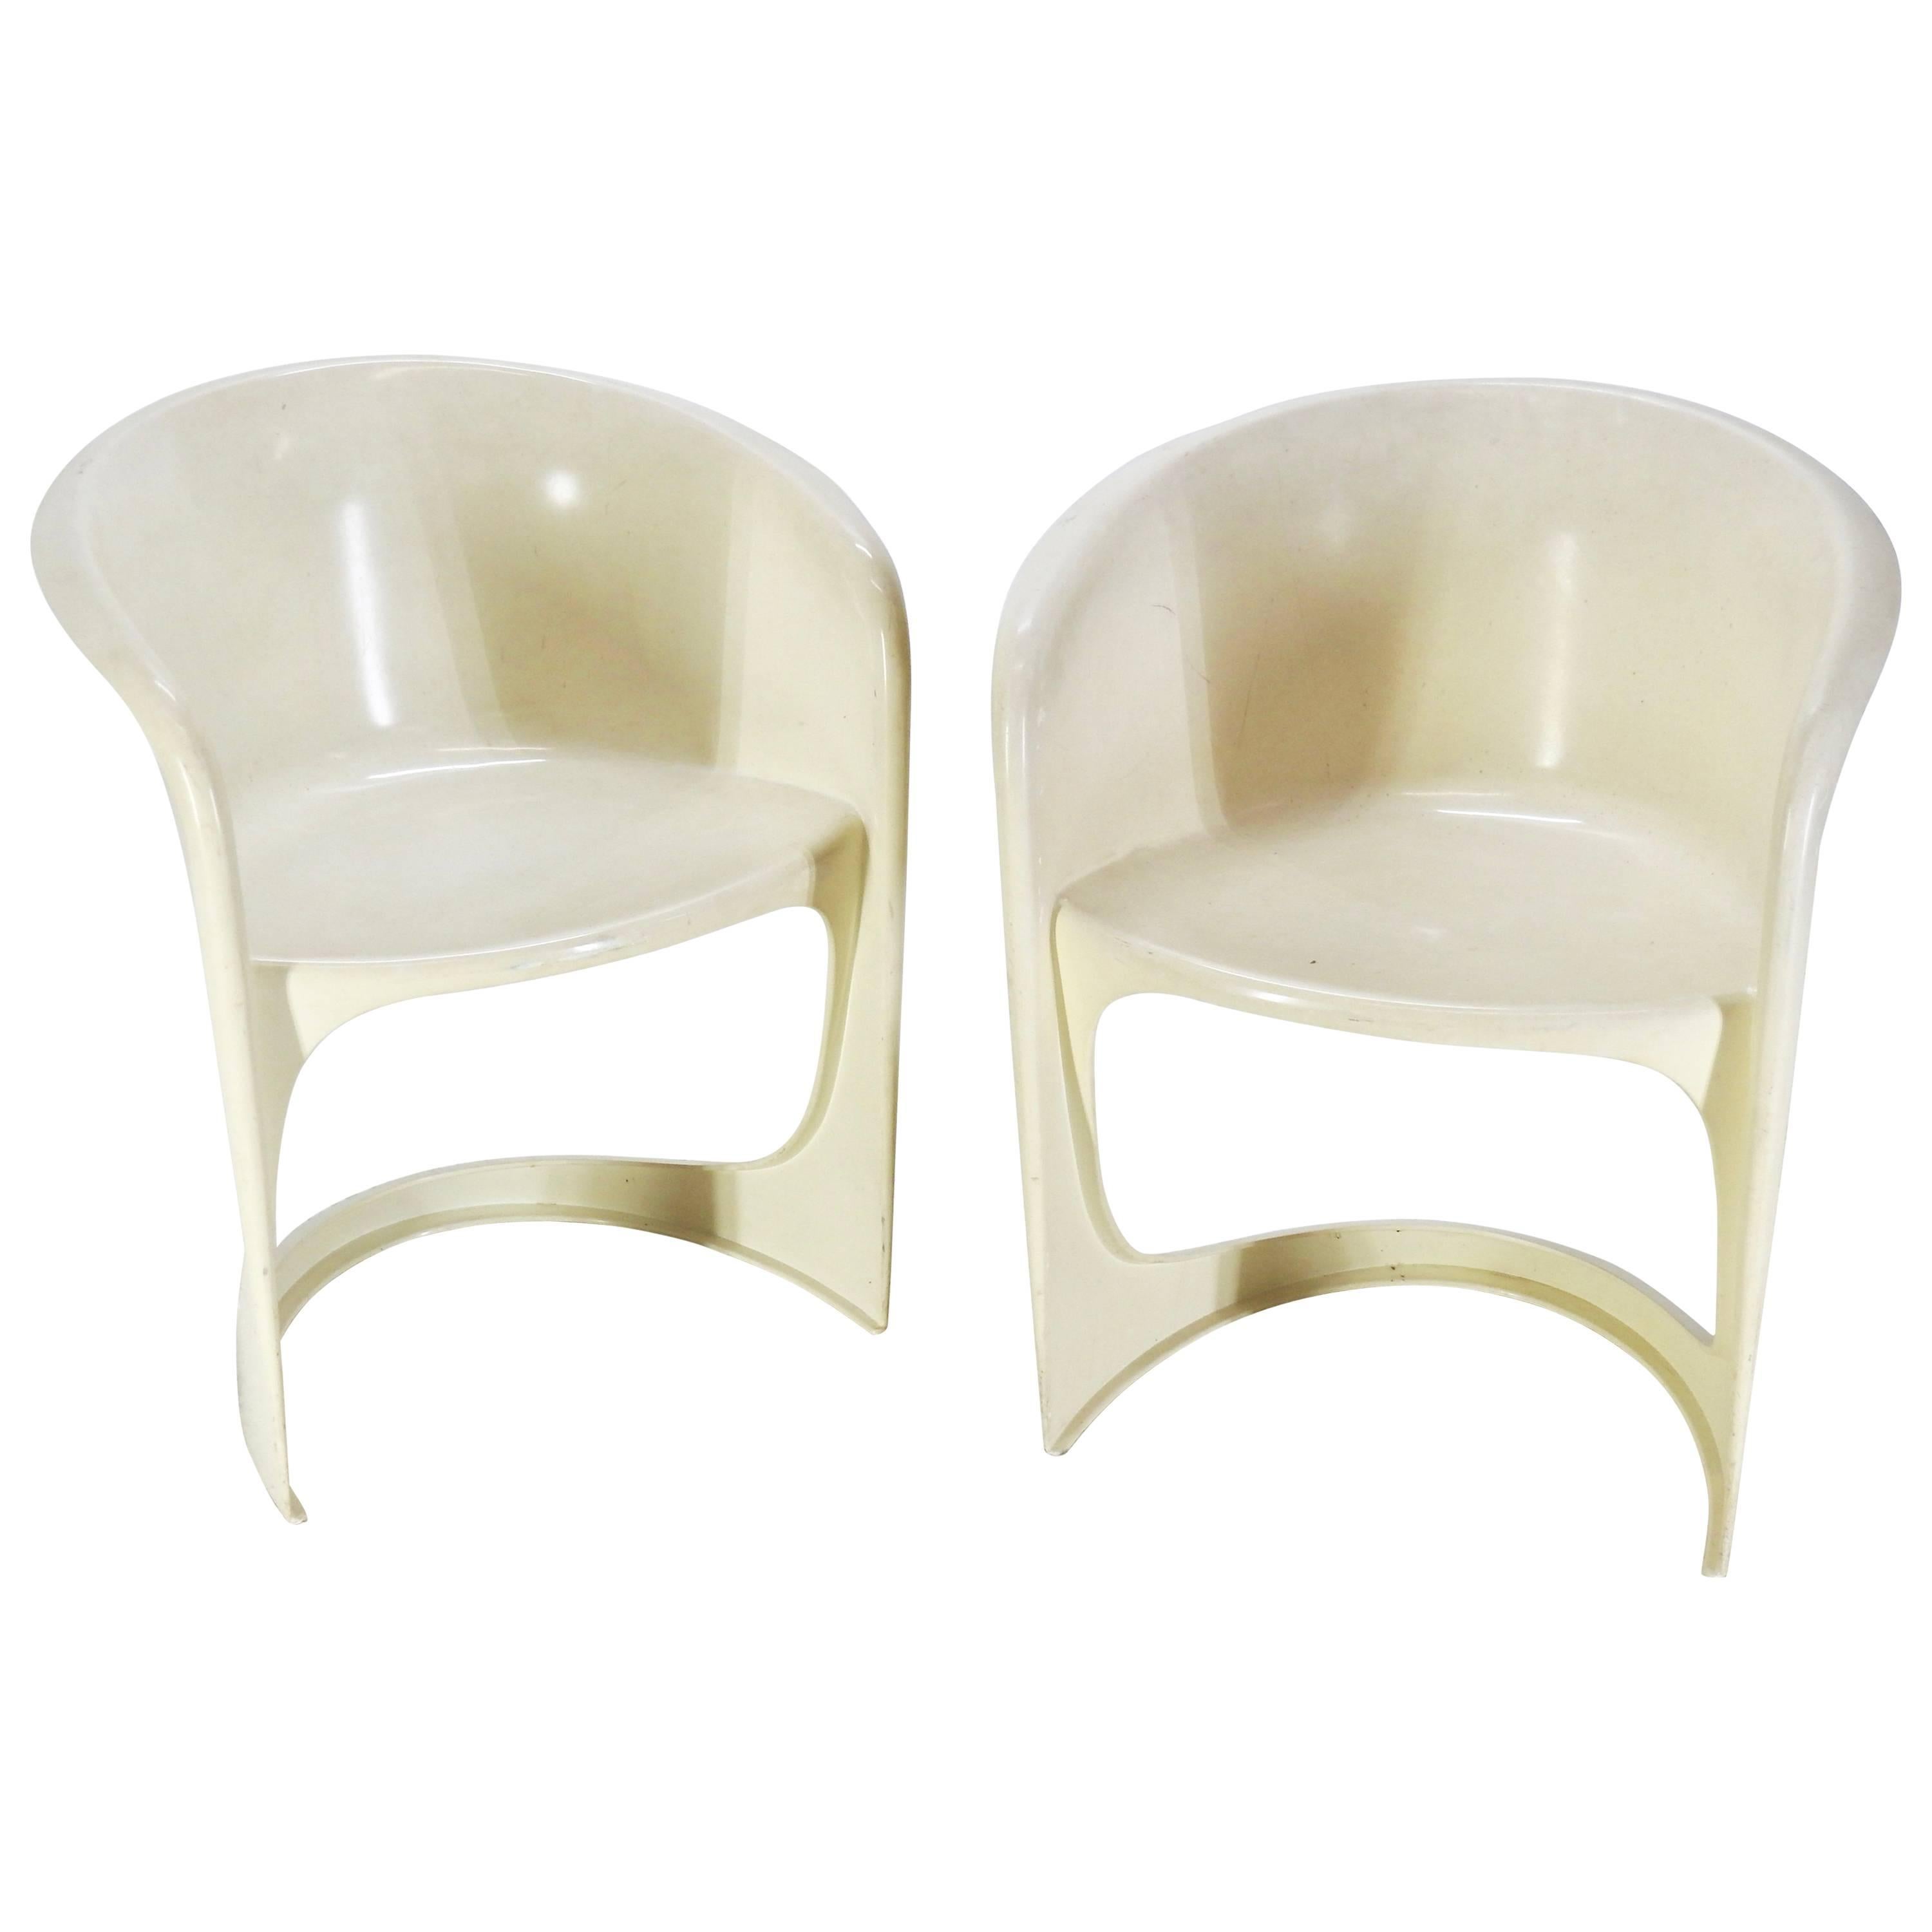 Cado Mid-Century Modern Molded Chairs by Steen Ostergaa